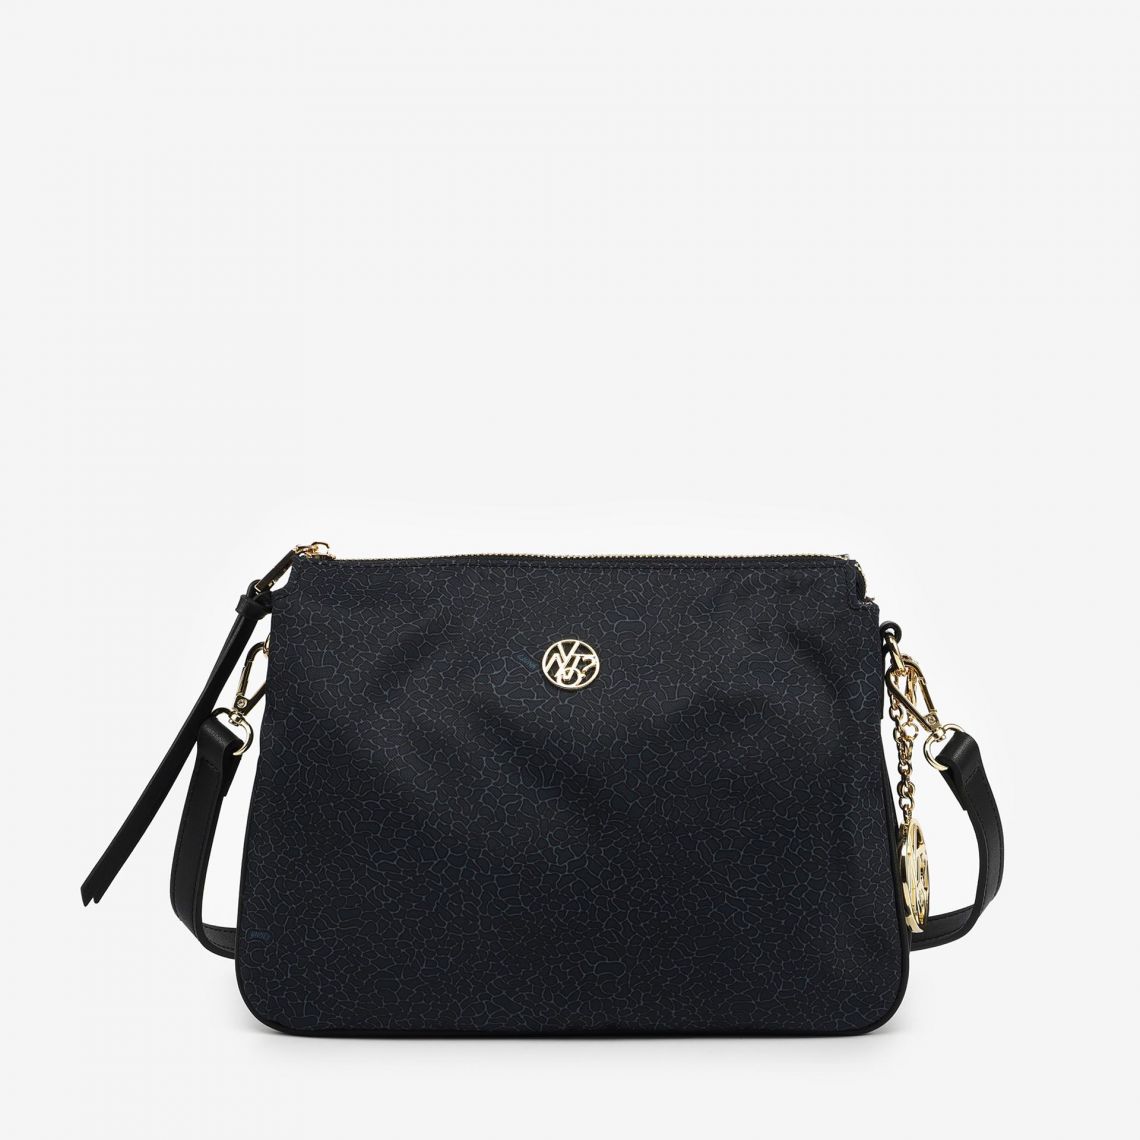 (image for) borsa y not Tracolla Black outlet y not